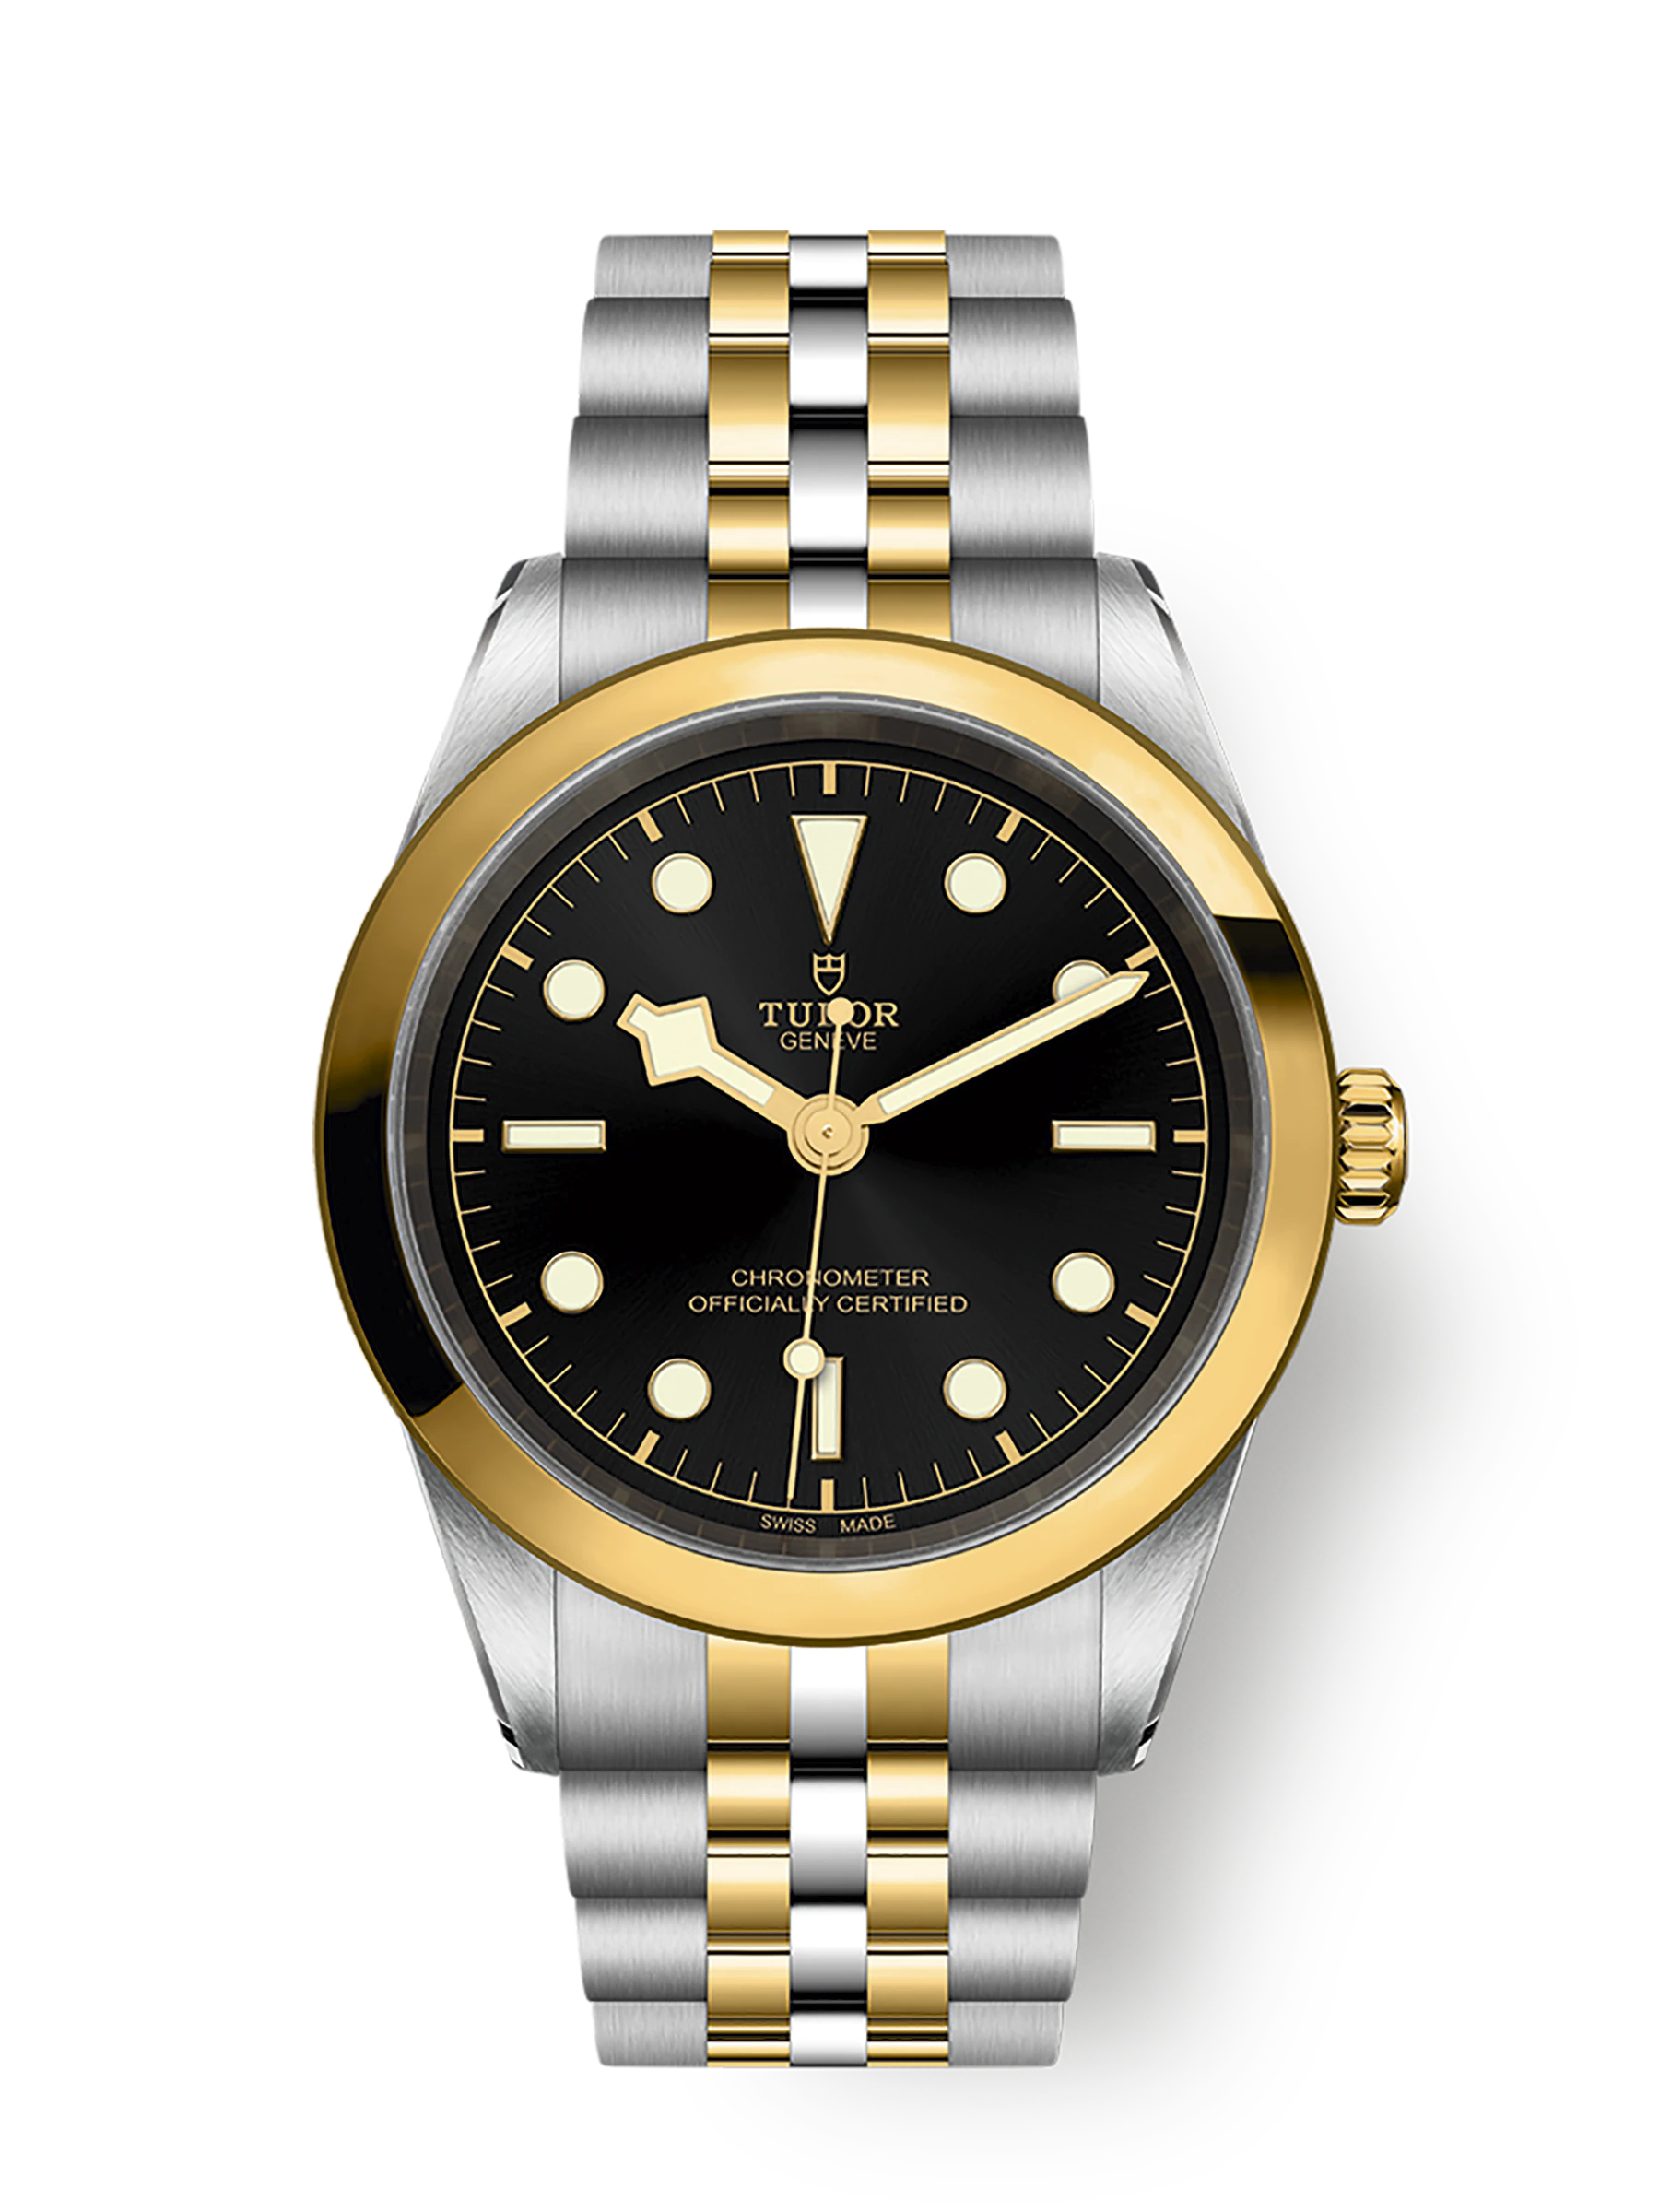 Tudor Black Bay 41 S&G, Stainless Steel and 18k Yellow Gold, Ref# M79683-0001